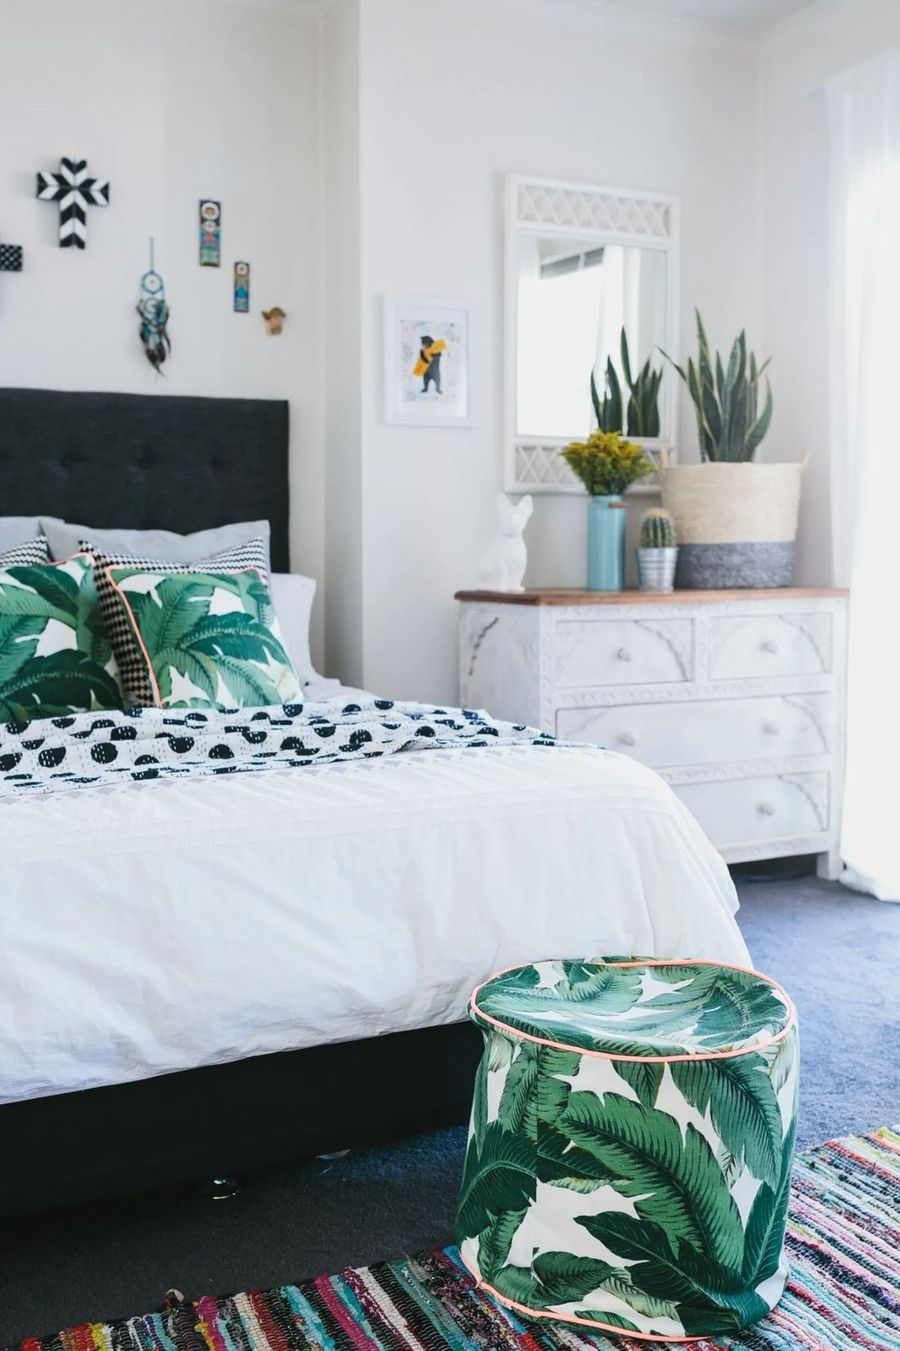 Boho Dresser in Tropical Bedroom via Apartment Therapy